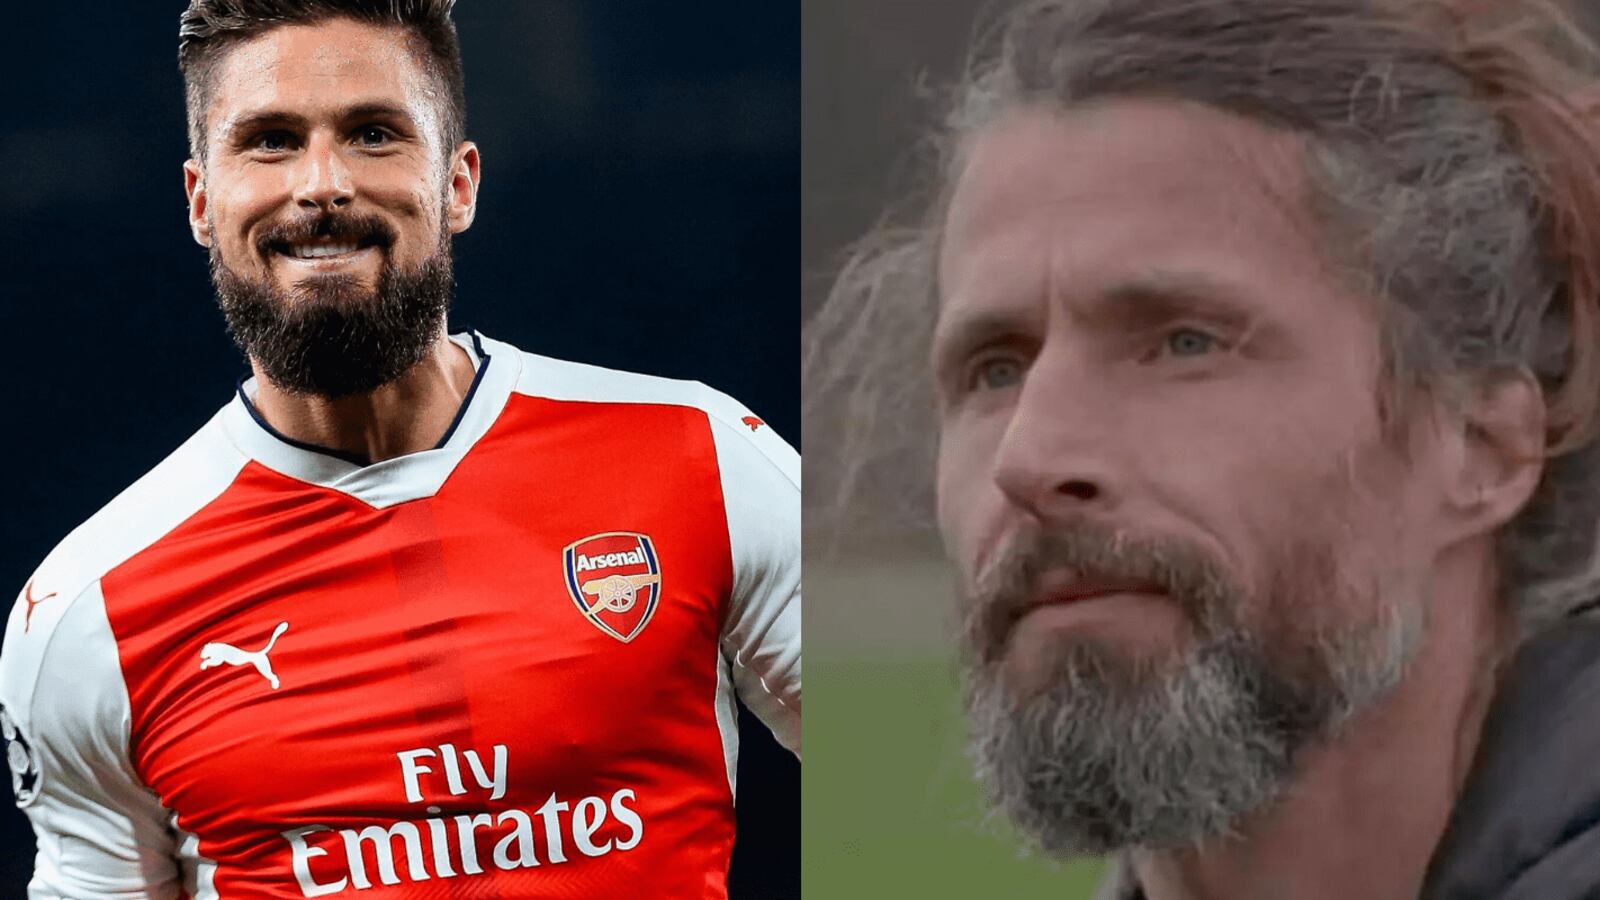 The lookalike brother of a Premier League star quit football to have a surprising job